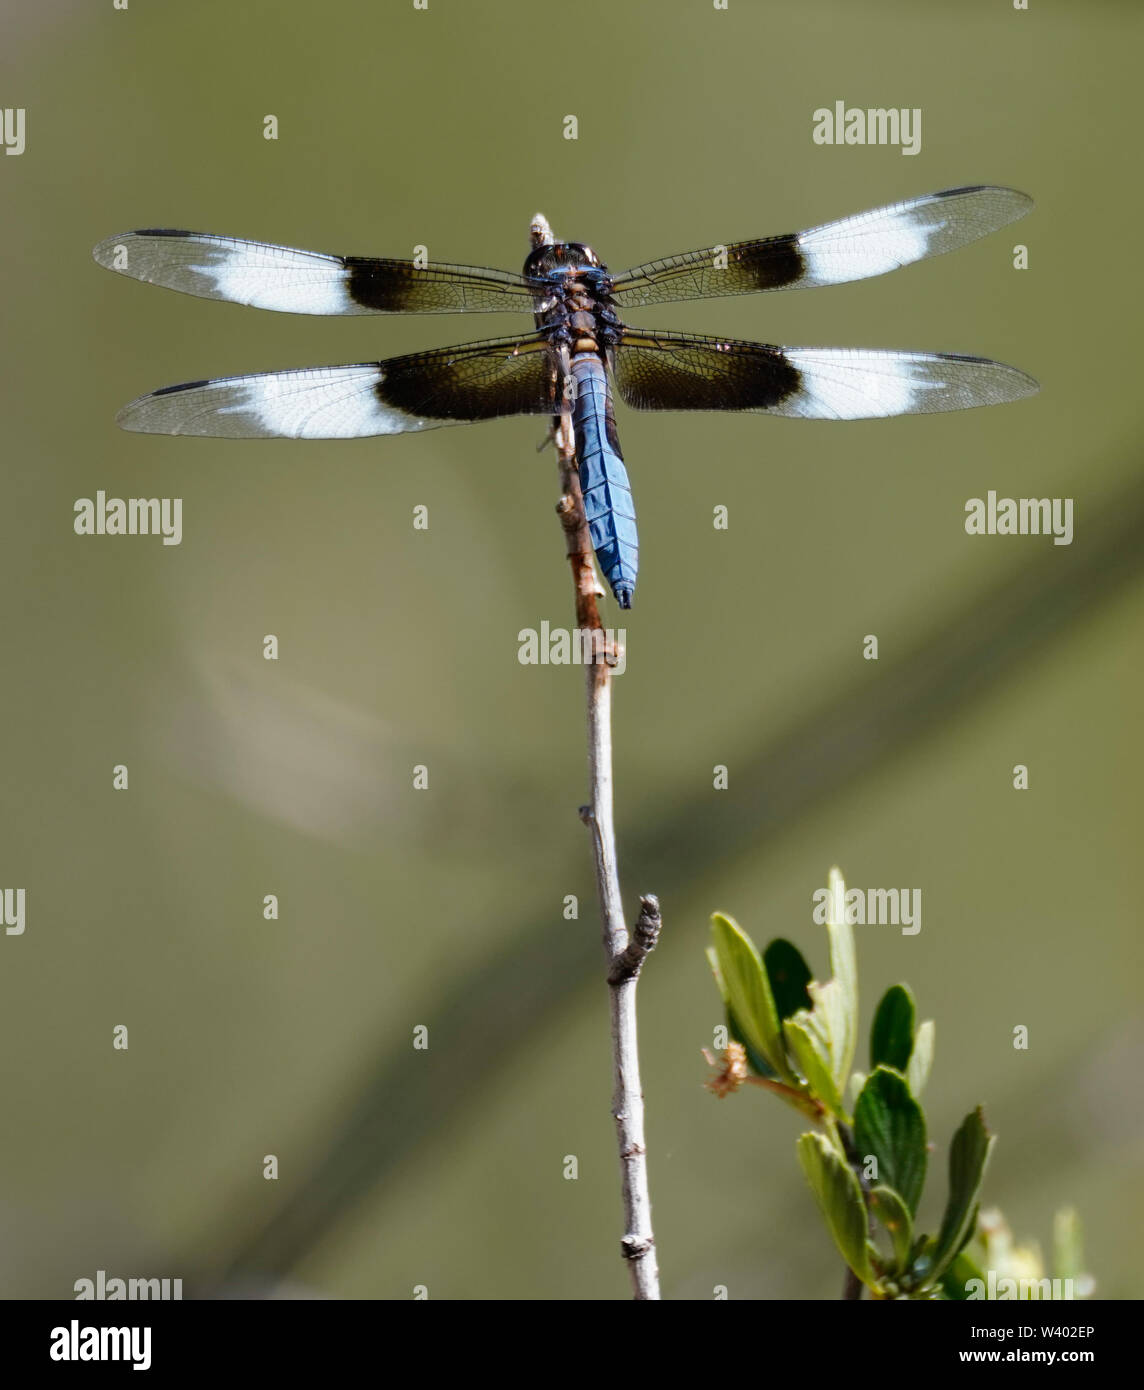 A beautiful blue dragonfly on a reed with leaves on the side. Stock Photo